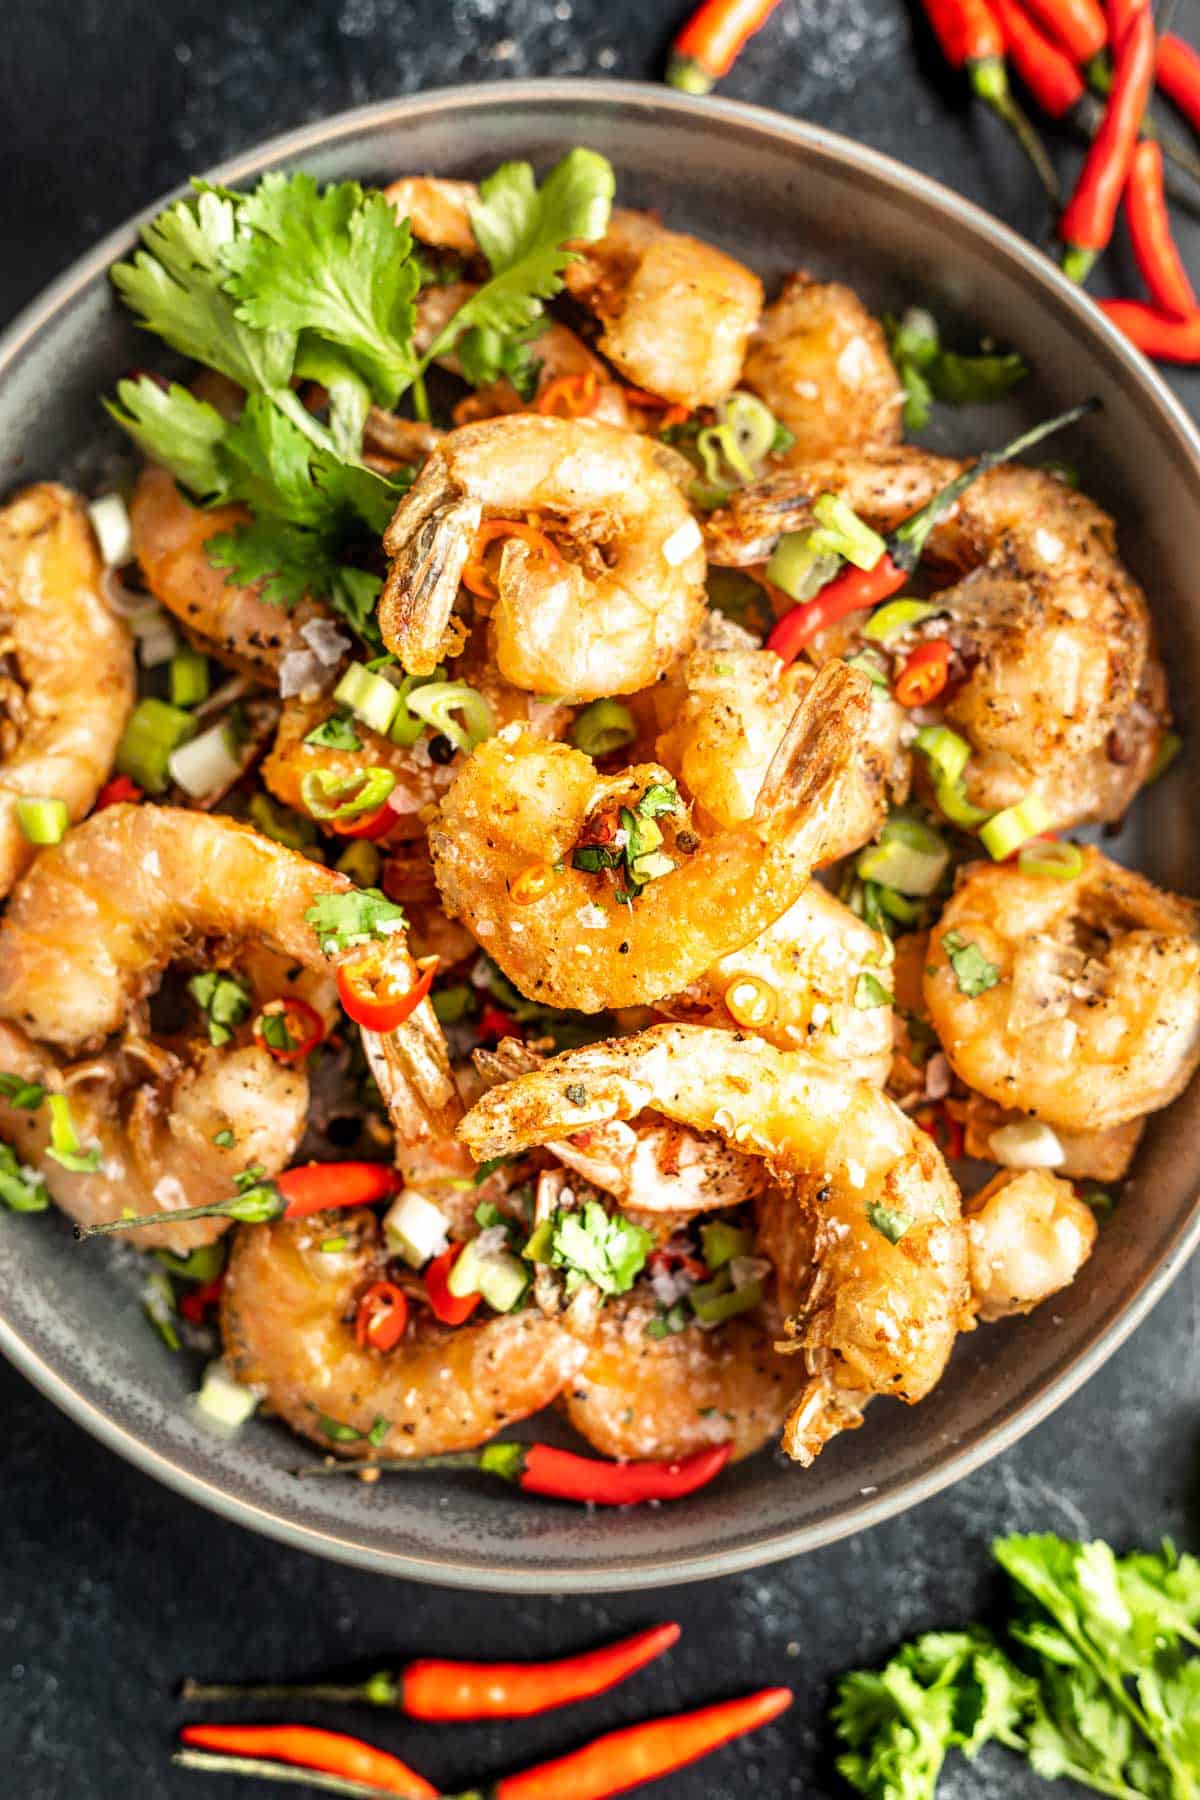 Keto Salt and Pepper Shrimp in a bowl topped with green onions, cilantro, and chiles.